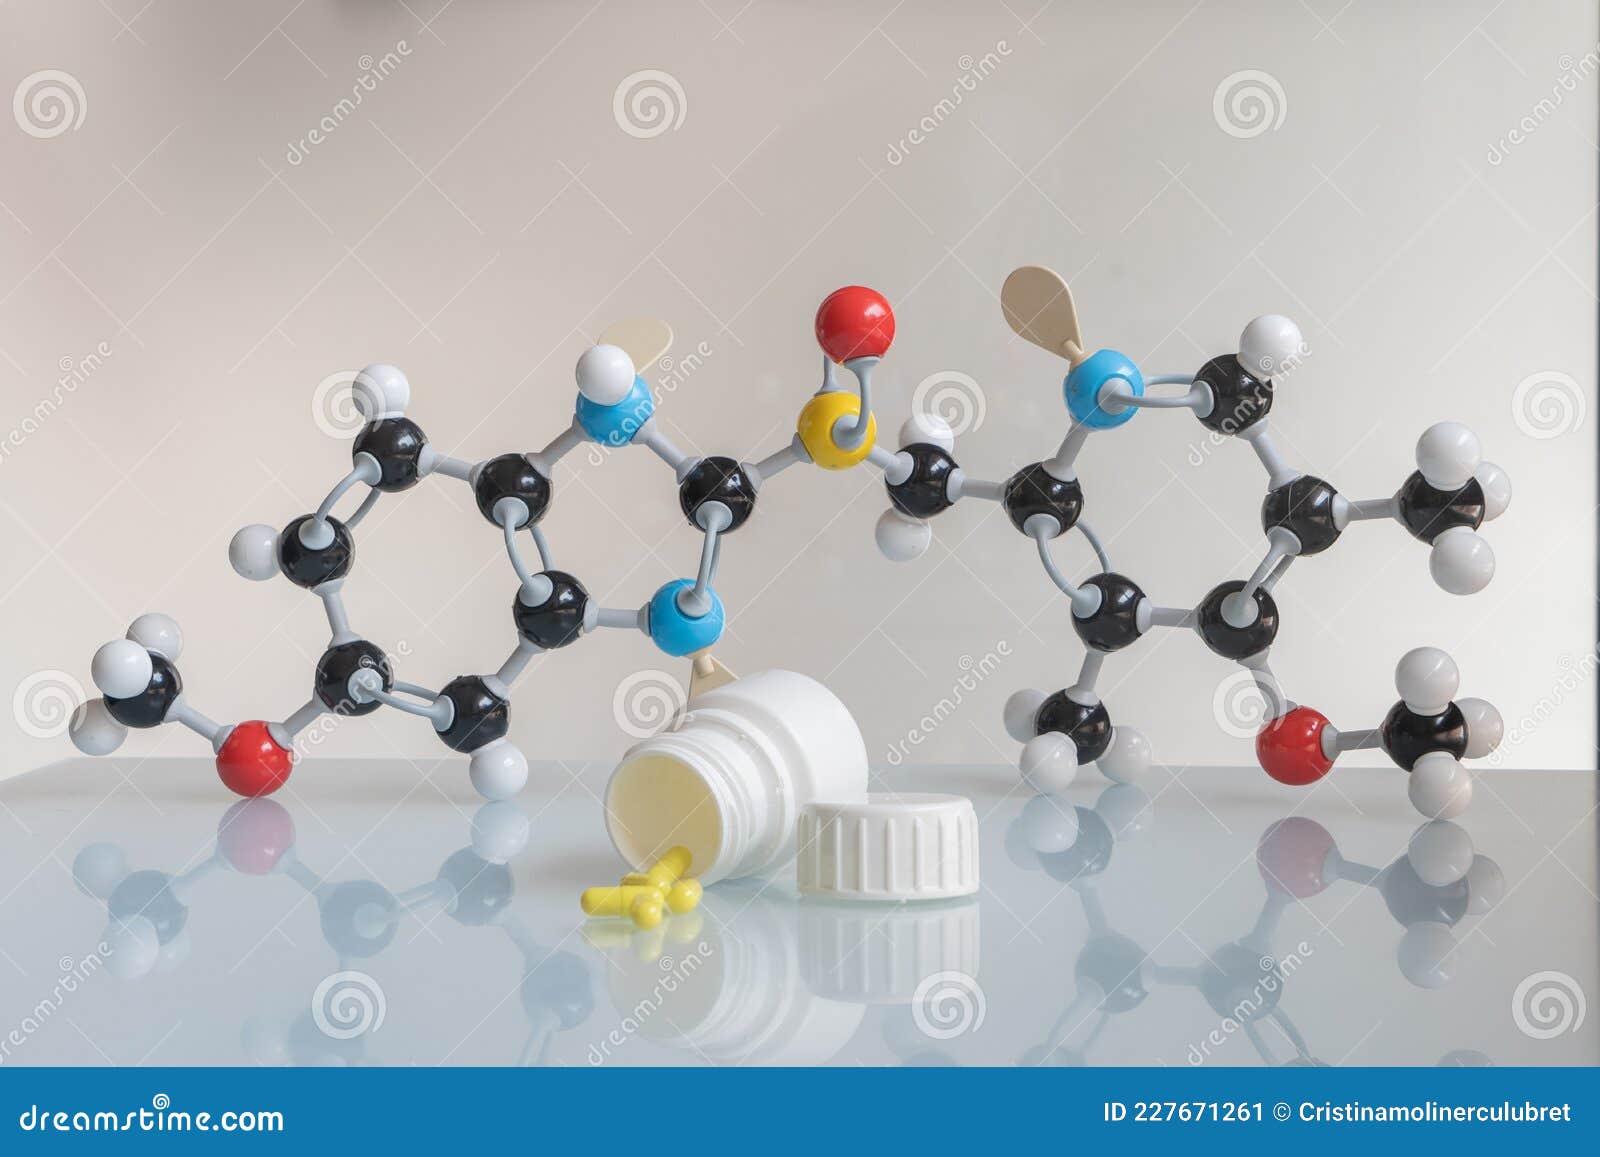 omeprazole pills and pill bote with omeprazole chemical formula made by molecular model in the background.